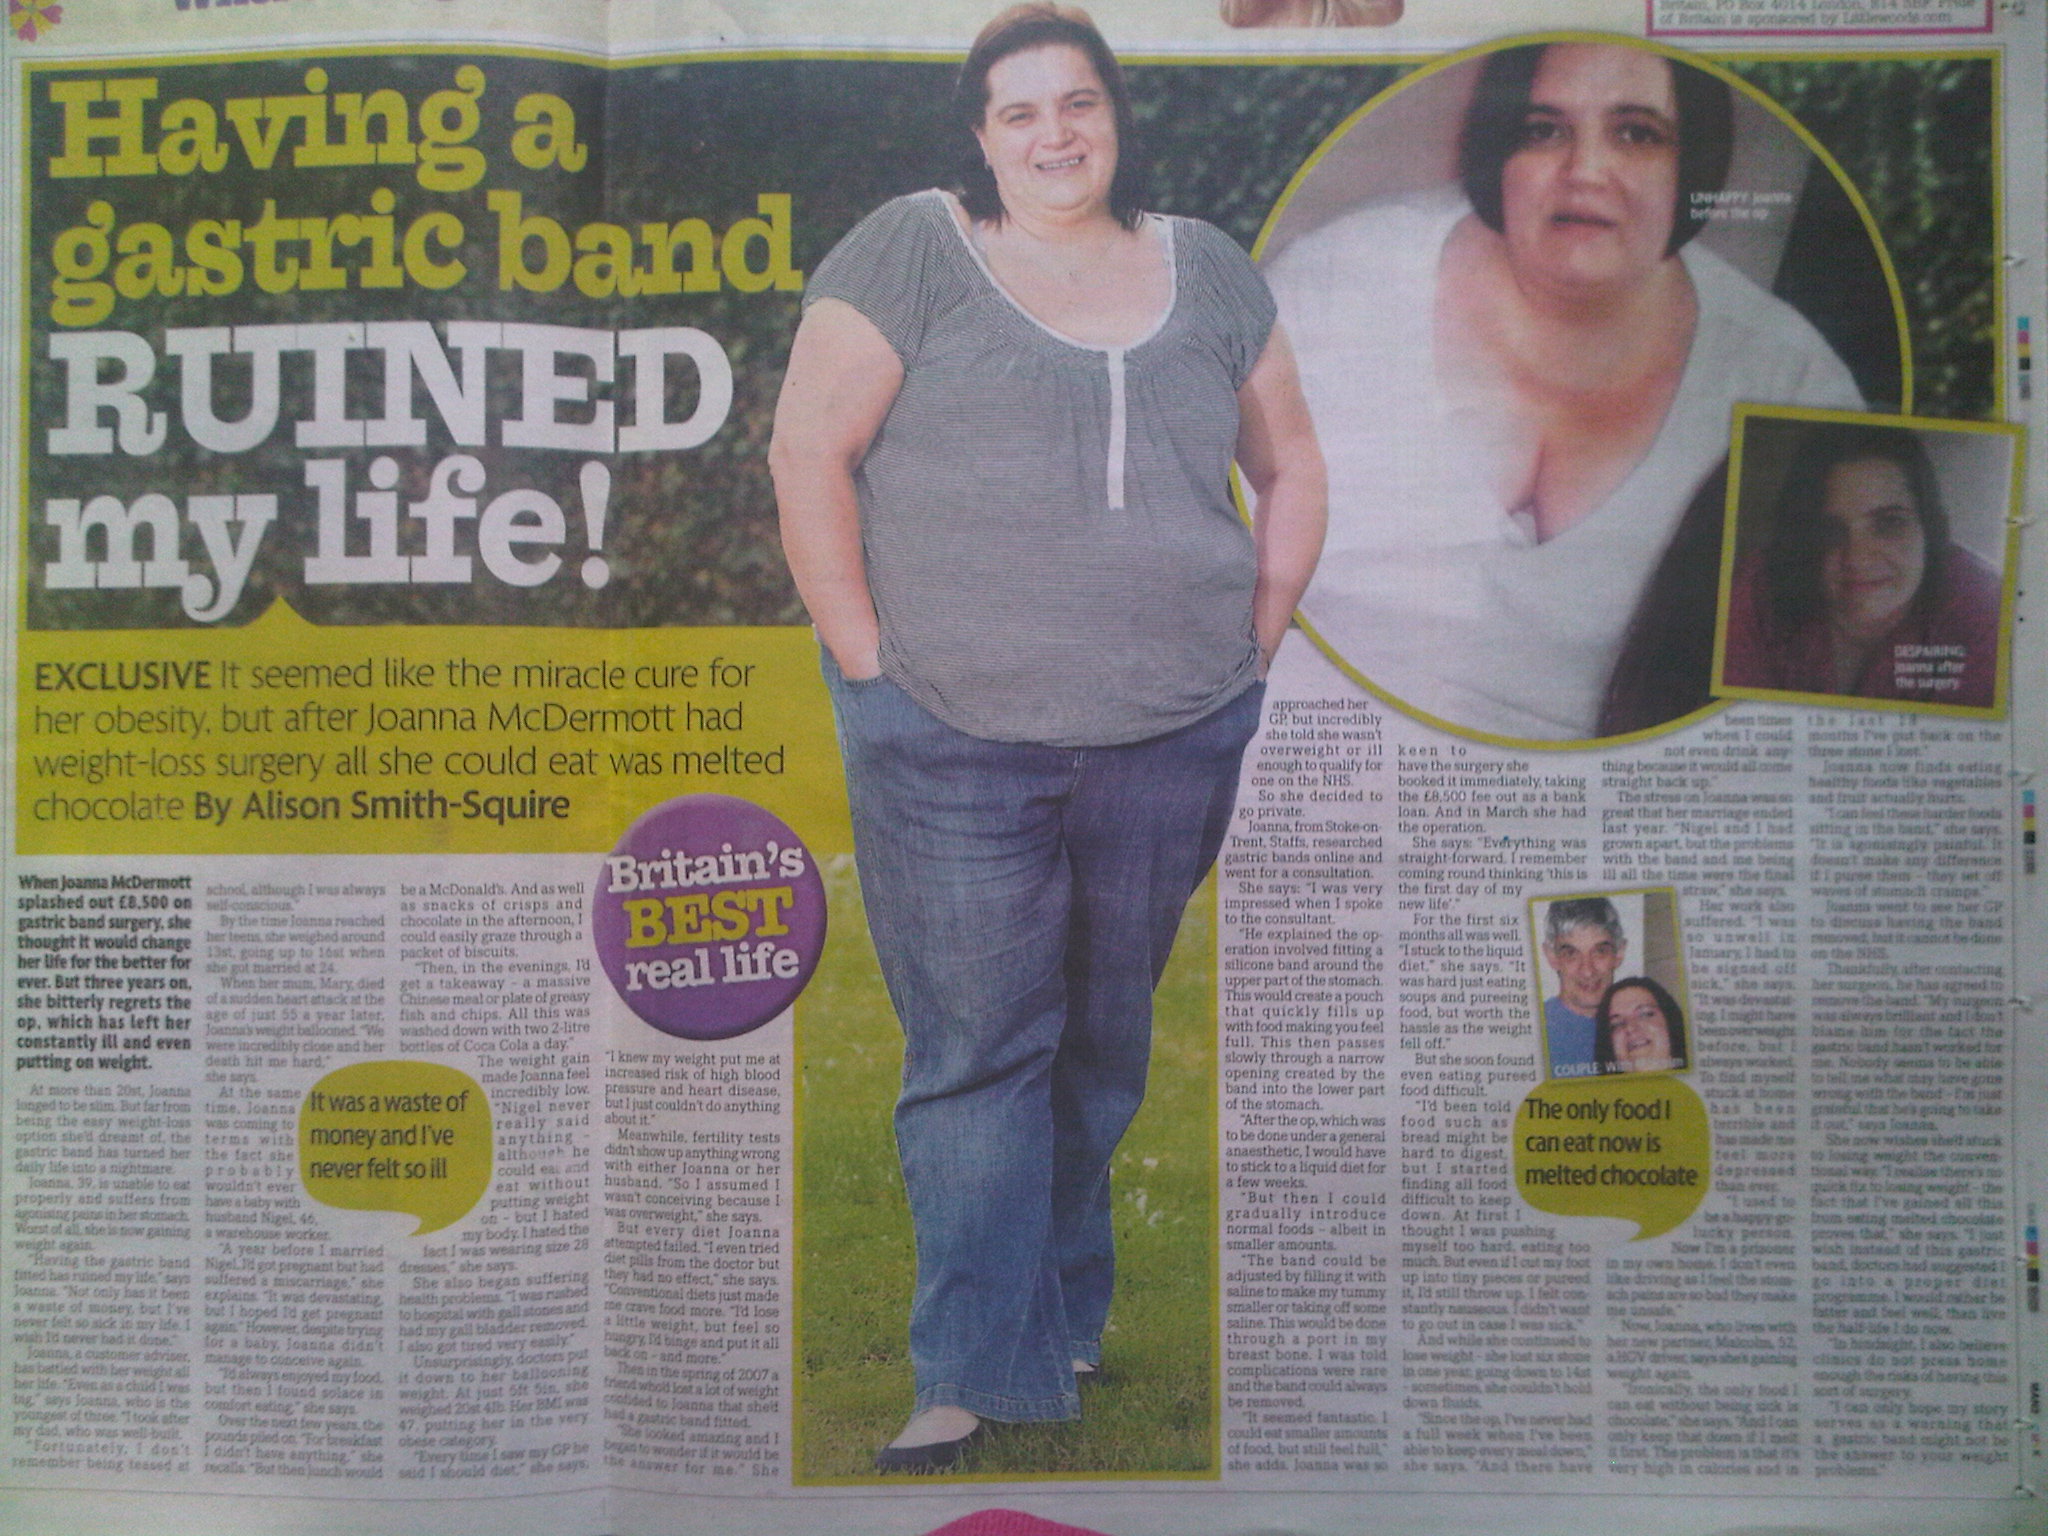 Gastric band surgery ruined my life... story sold to Daily Mirror